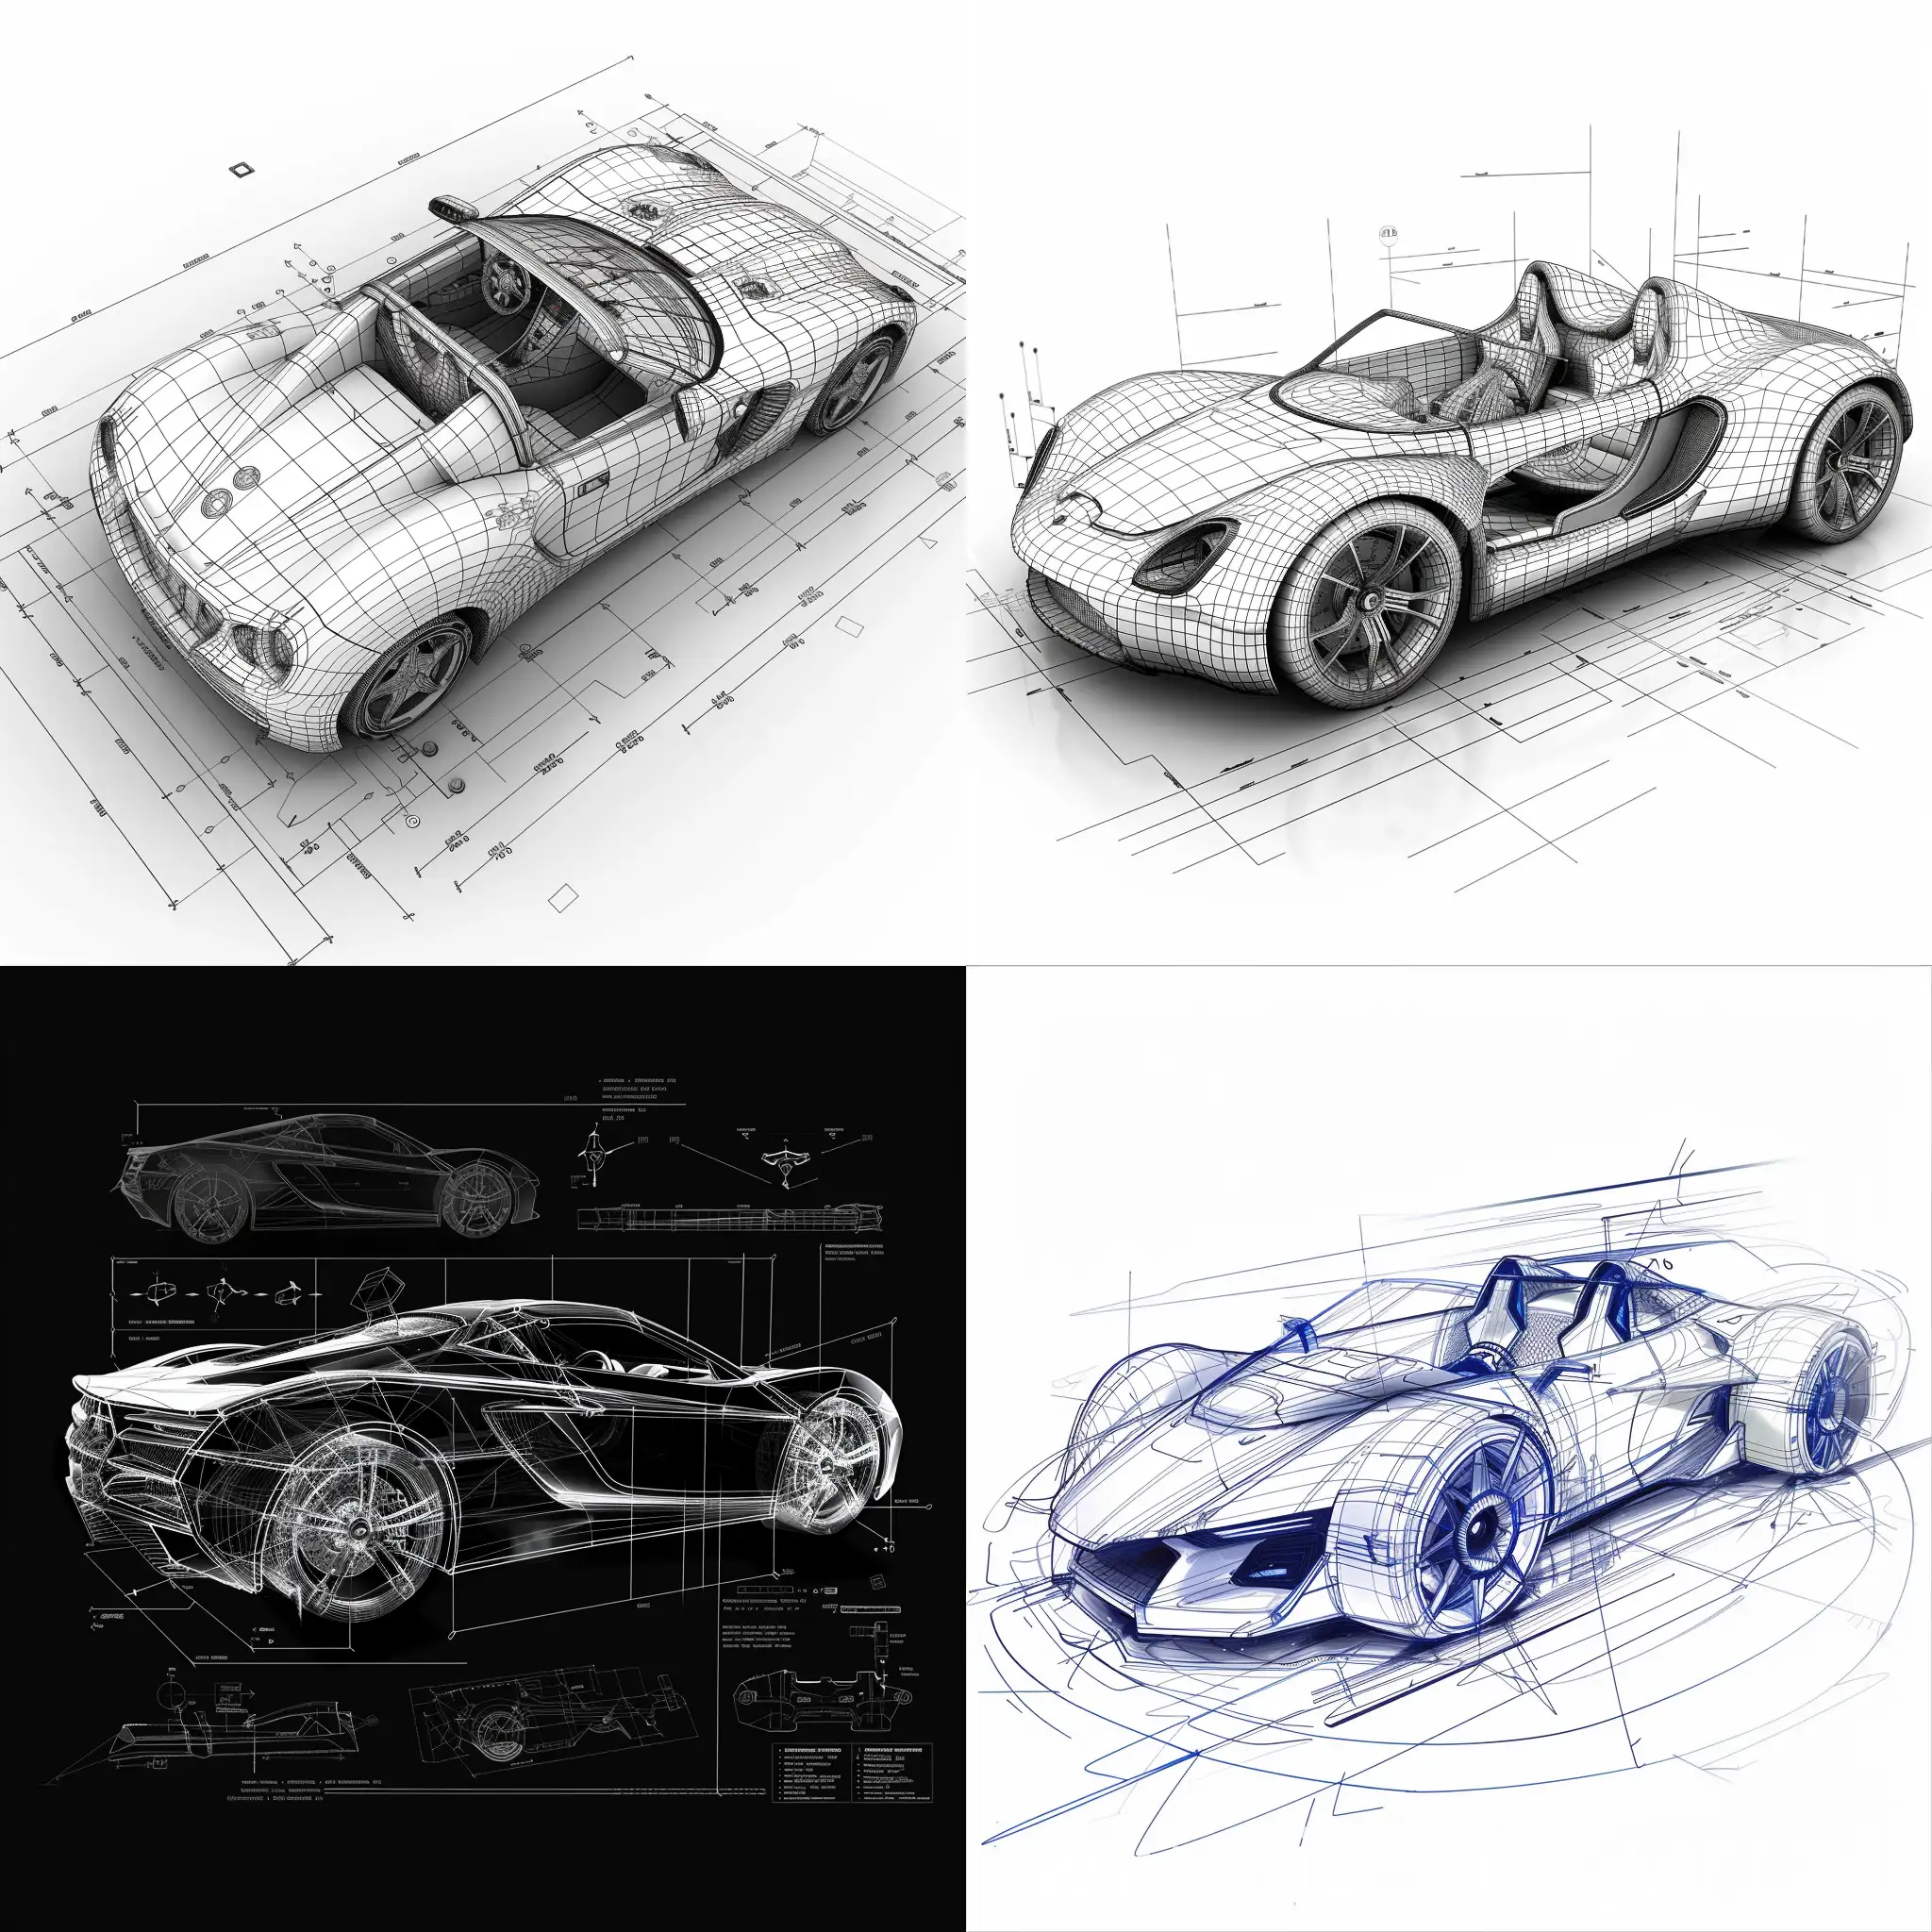 orthographics view blueprints of a concept small sports car